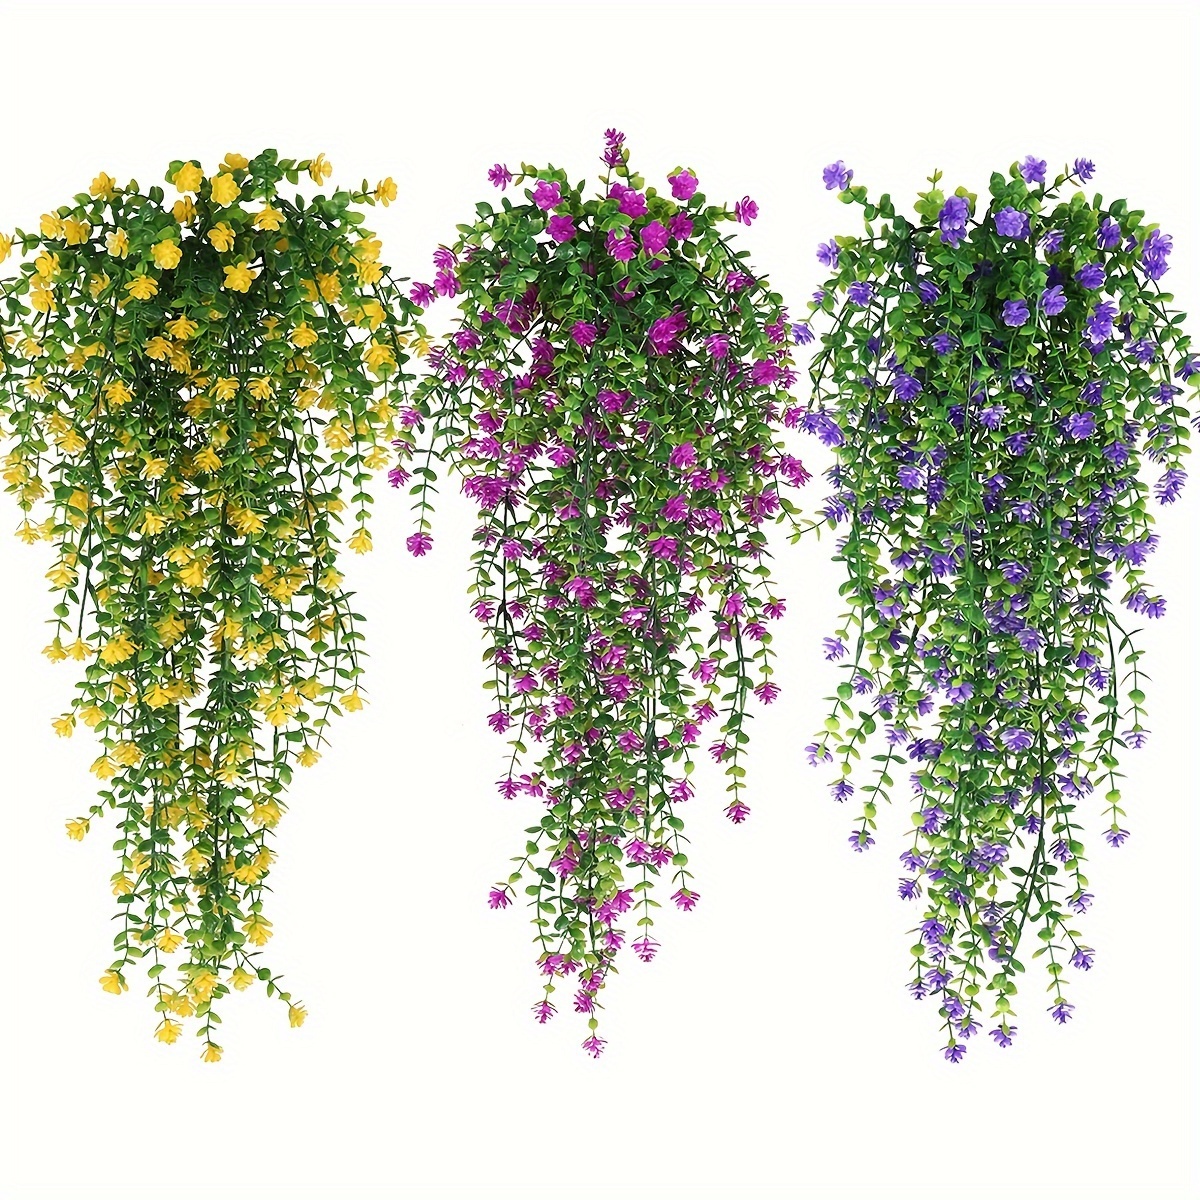 

3pcs 30.7in Artificial Flowers Boxwood Greenery Ivy Vines, Uv Resistant Plastic Plants Garland Hanging Shrubs Plants For Wedding Party Room Front Porch Hanging Basket Indoor Home Decor Outdoor Decor